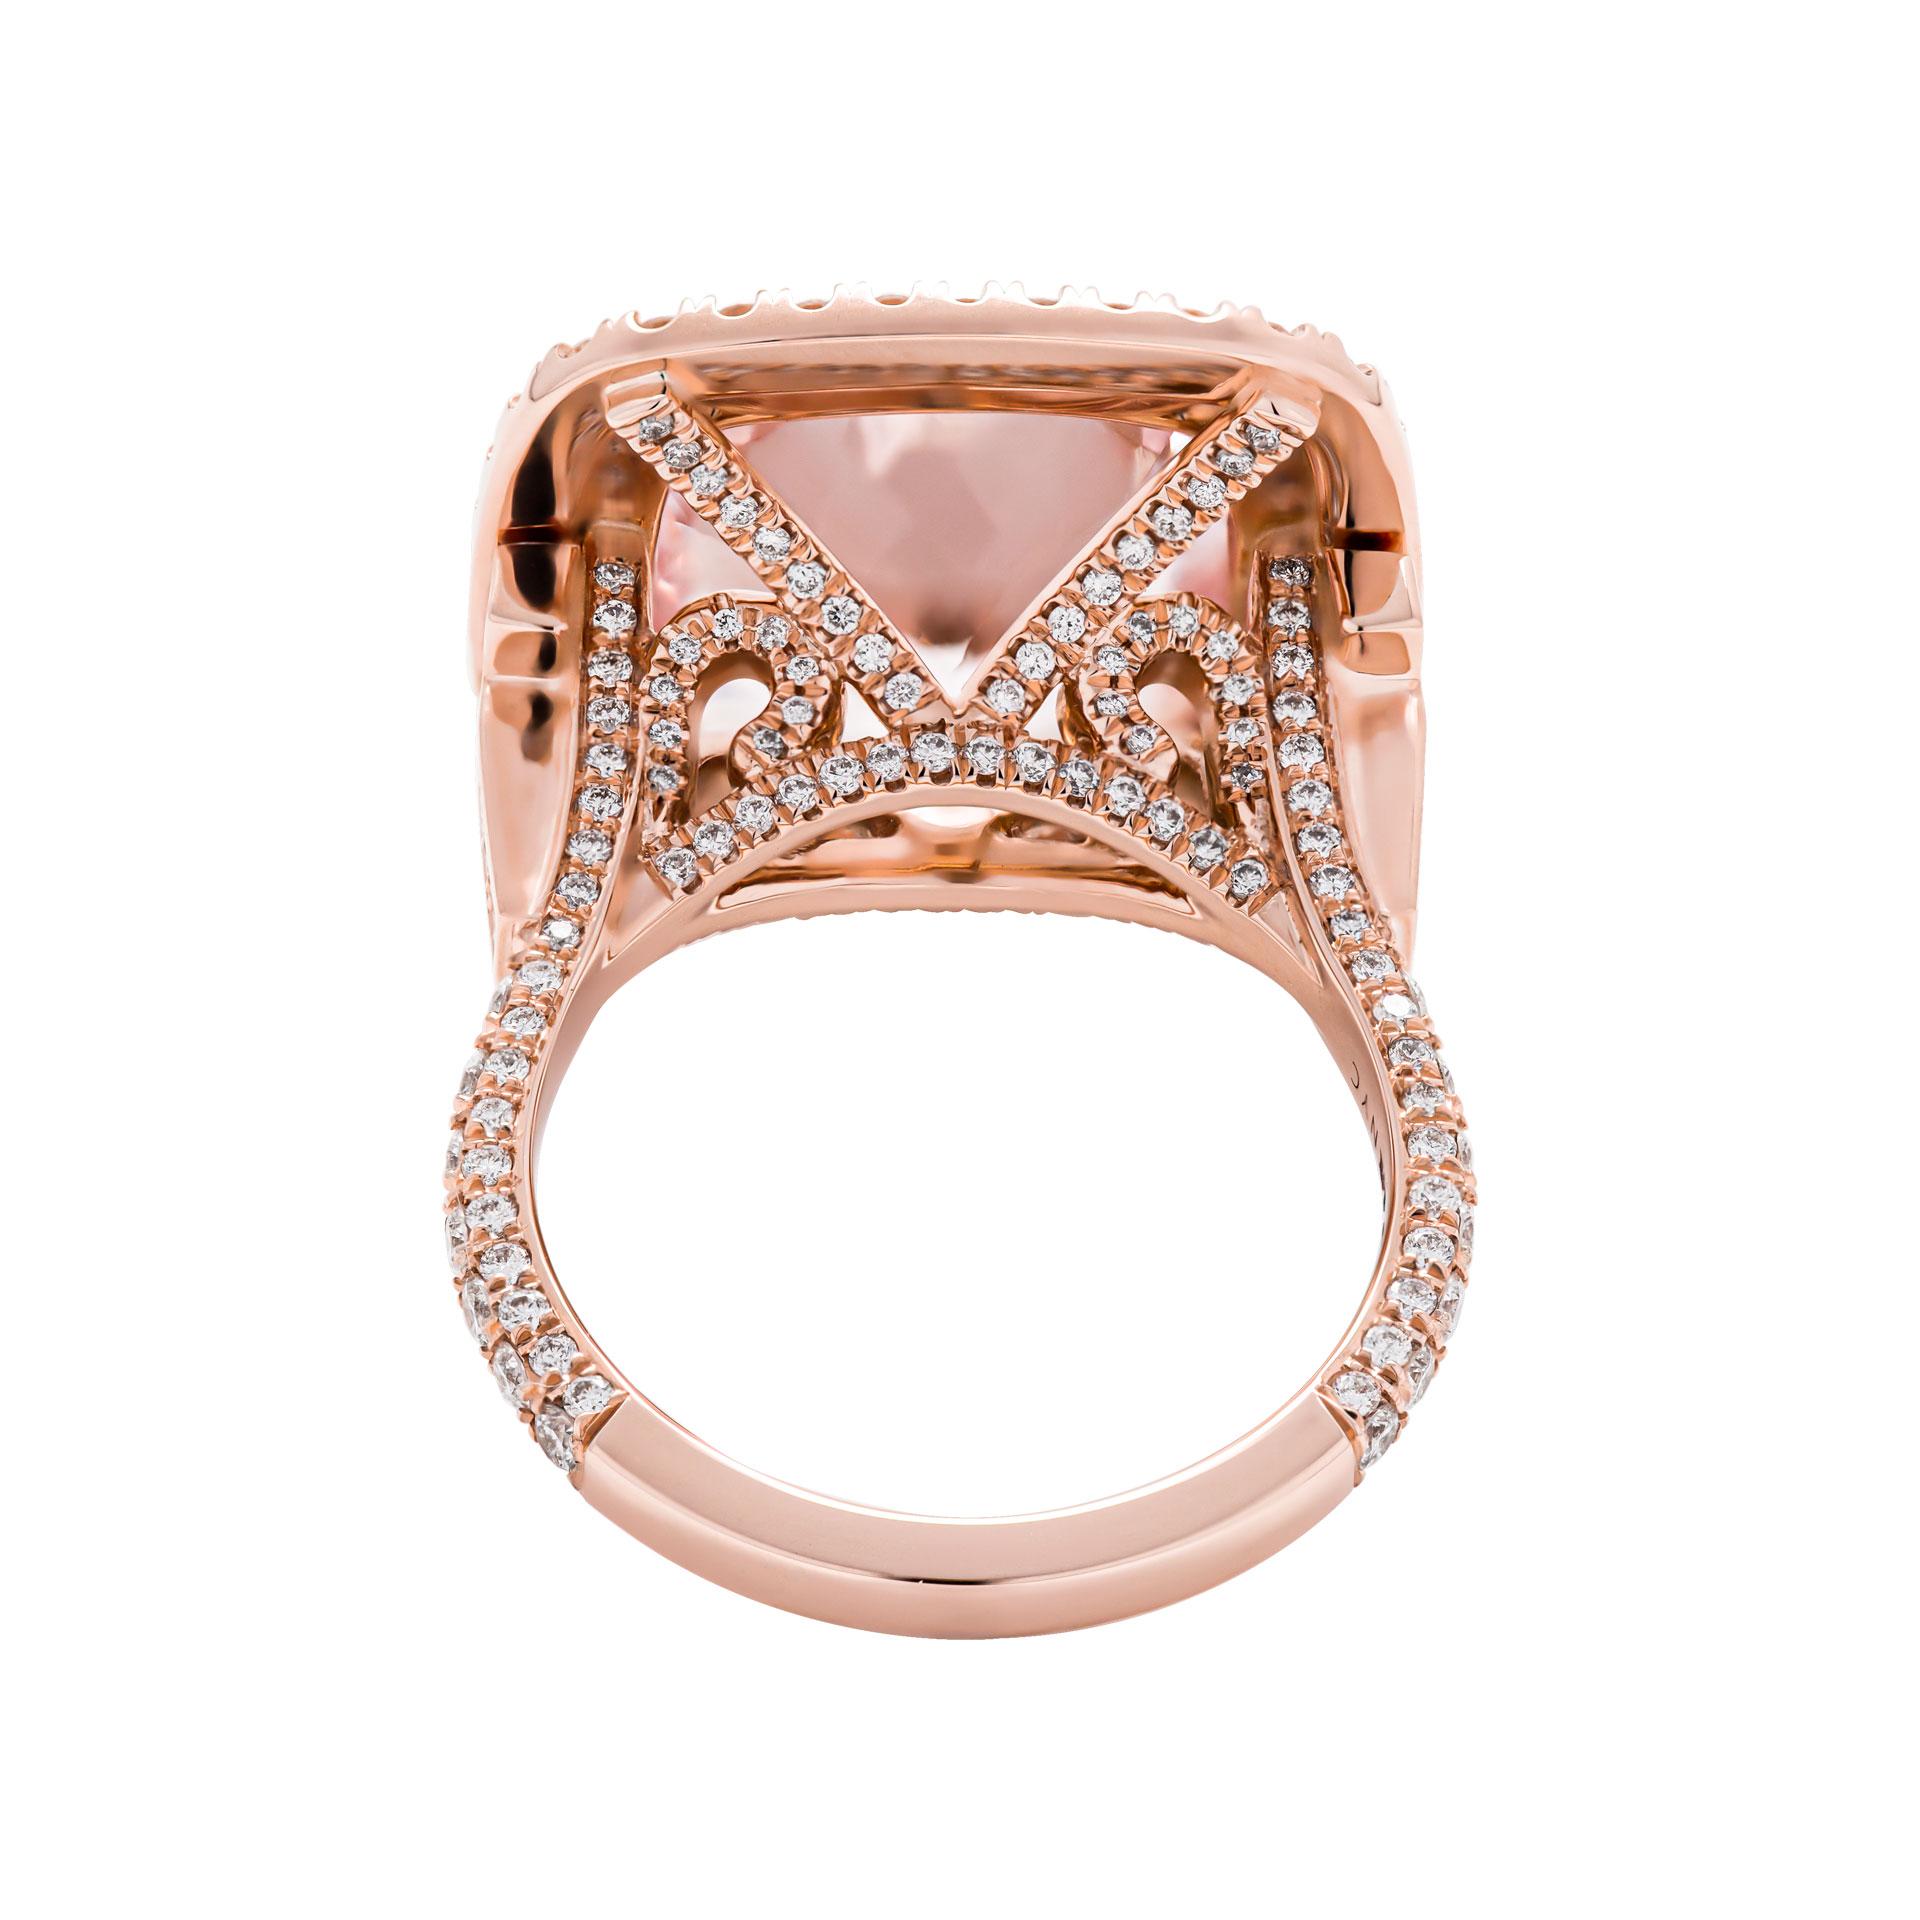 Cushion Cut Cocktail Ring with Double Halo with 6.75ct Morganite For Sale